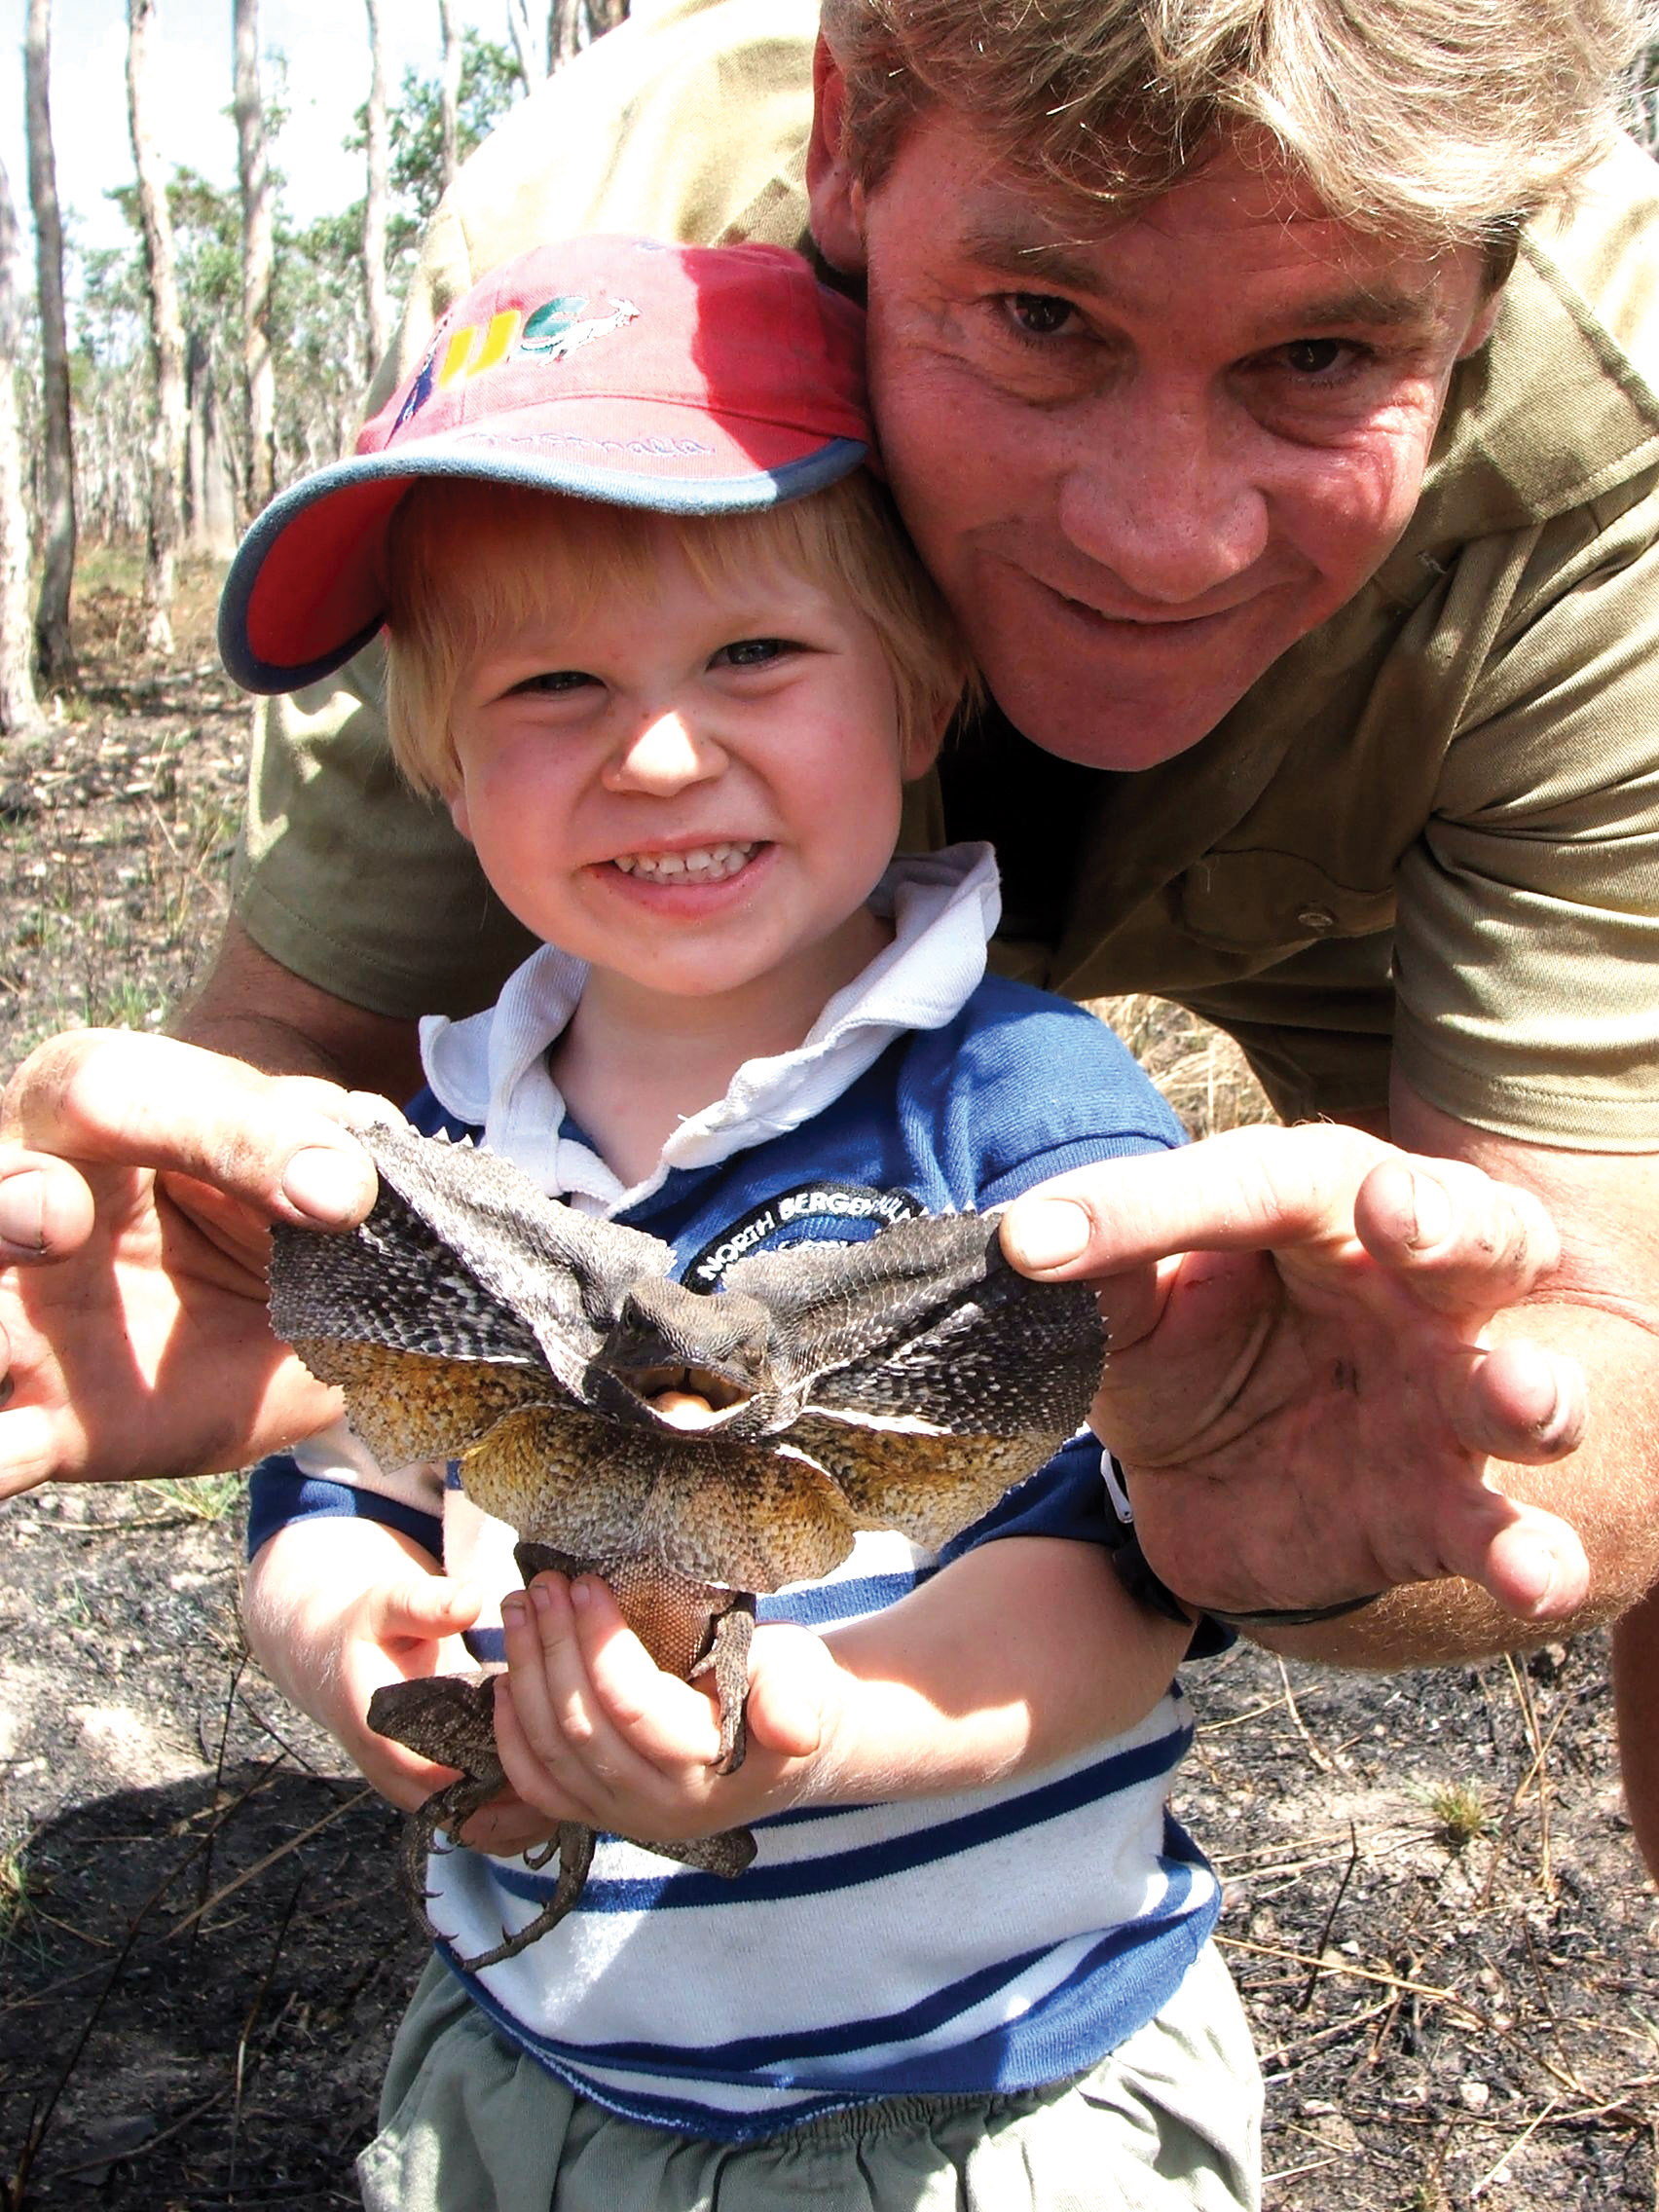 Steve Irwin and his son Robert at Australia Zoo on August 2, 2006 in Beerwah, Australia | Source: Getty Images